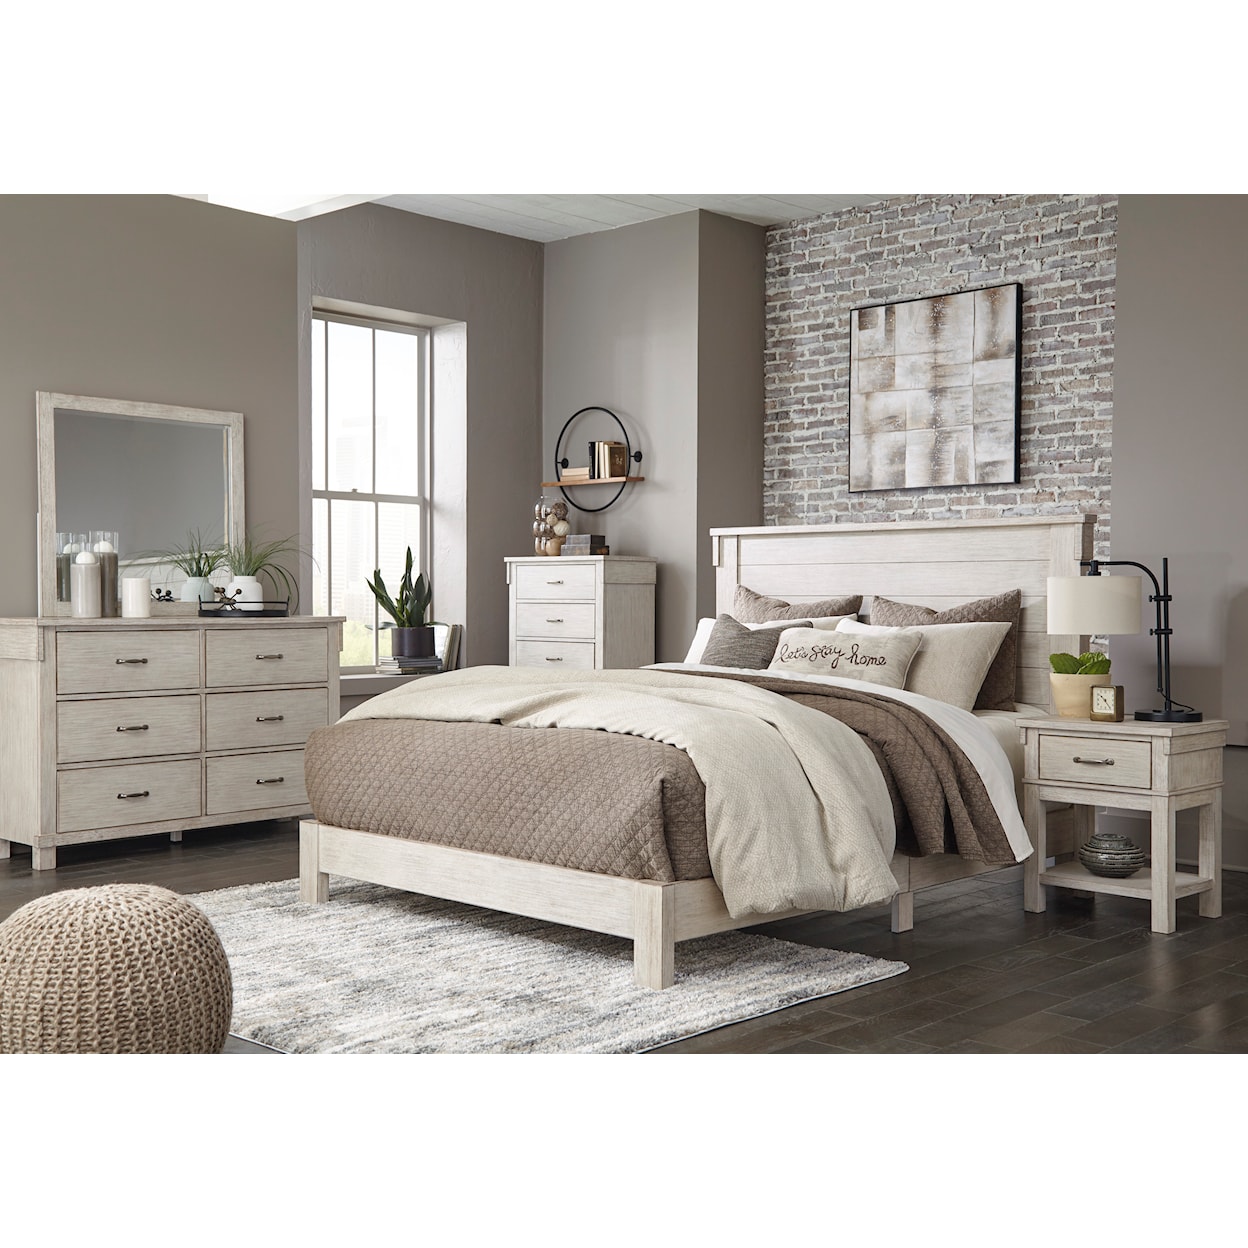 Signature Design by Ashley Hollentown Queen Panel Bed